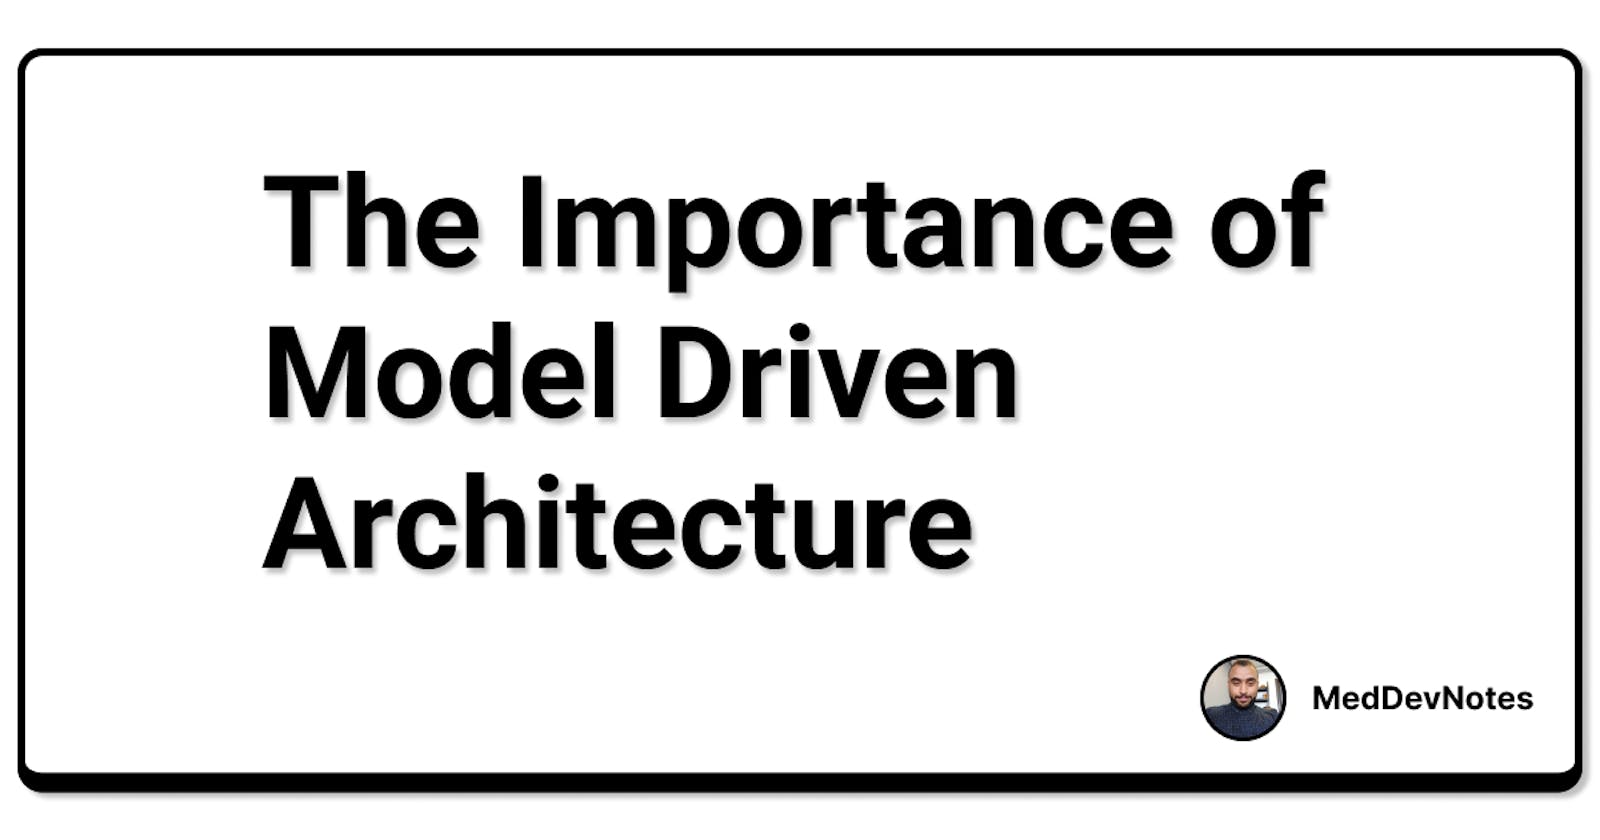 The importance of Model-Driven Architecture